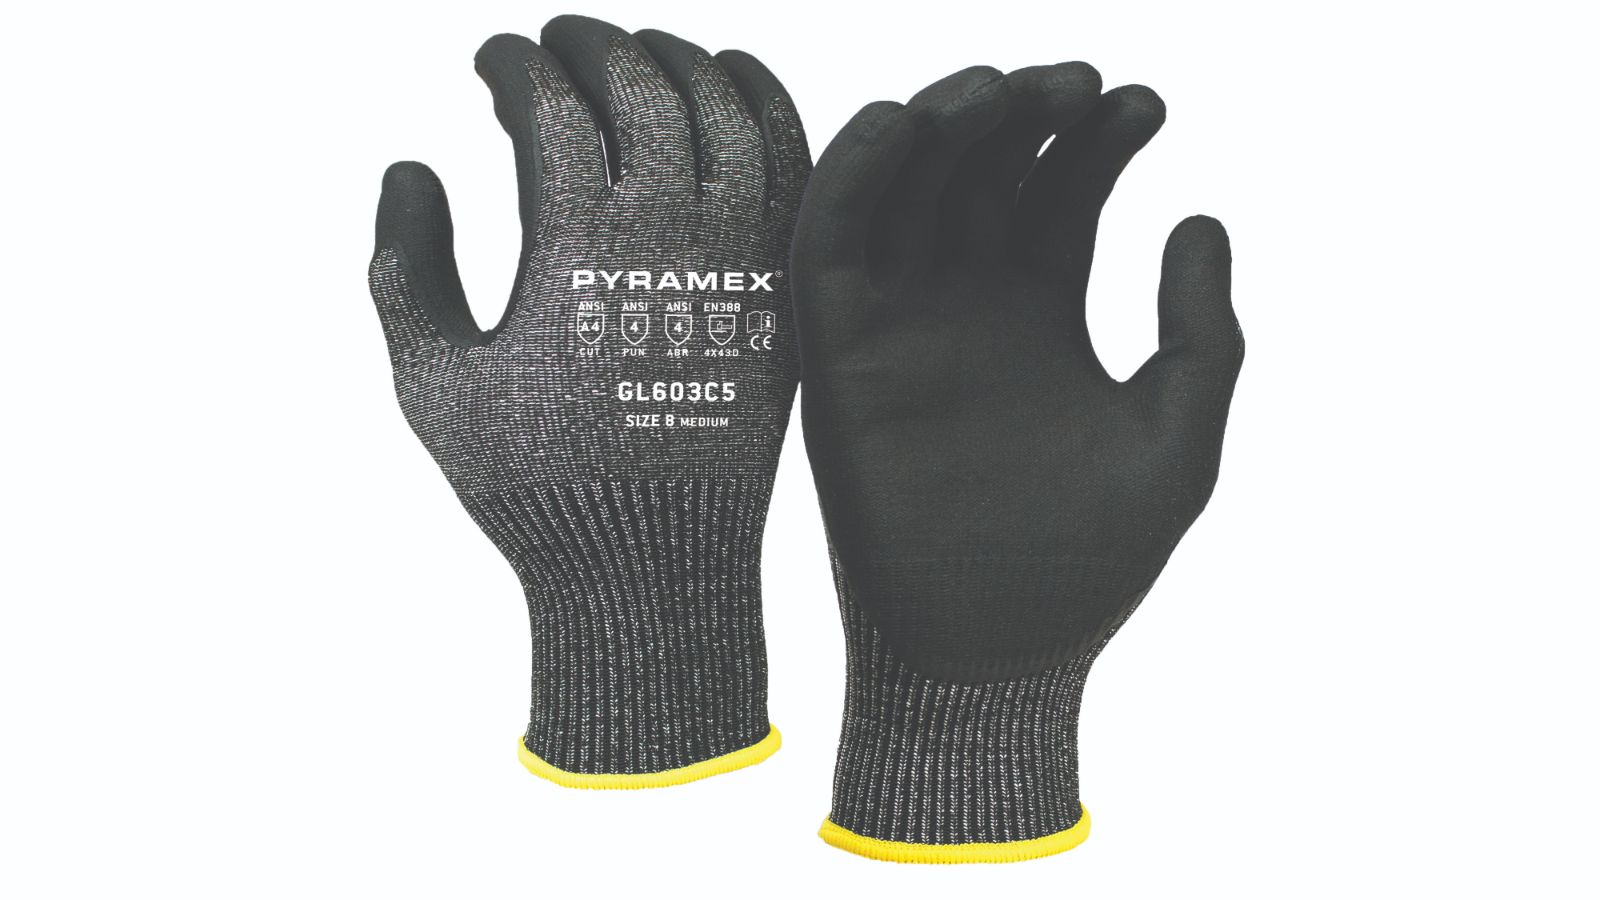 A Full Black and Grey Color Gloves Pair